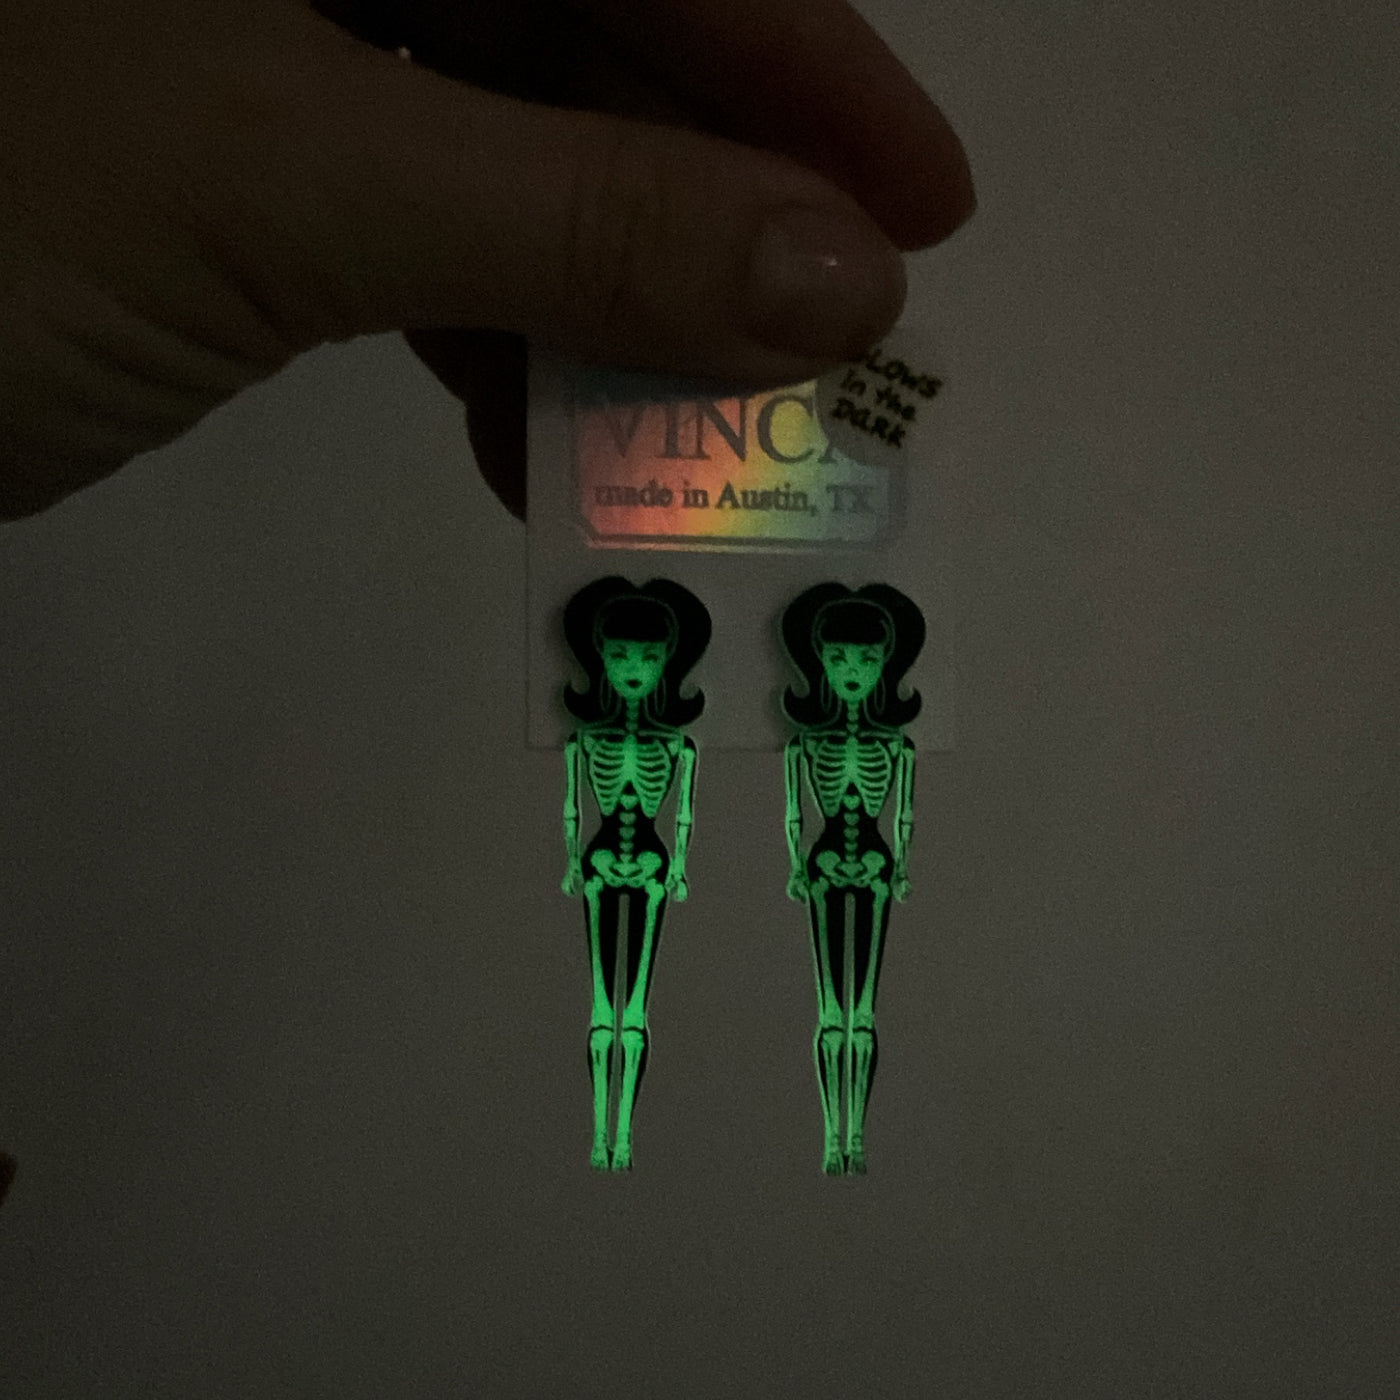 Illuminated glow-in-the-dark skeleton '60s doll earrings on a white card with the Vinca logo.